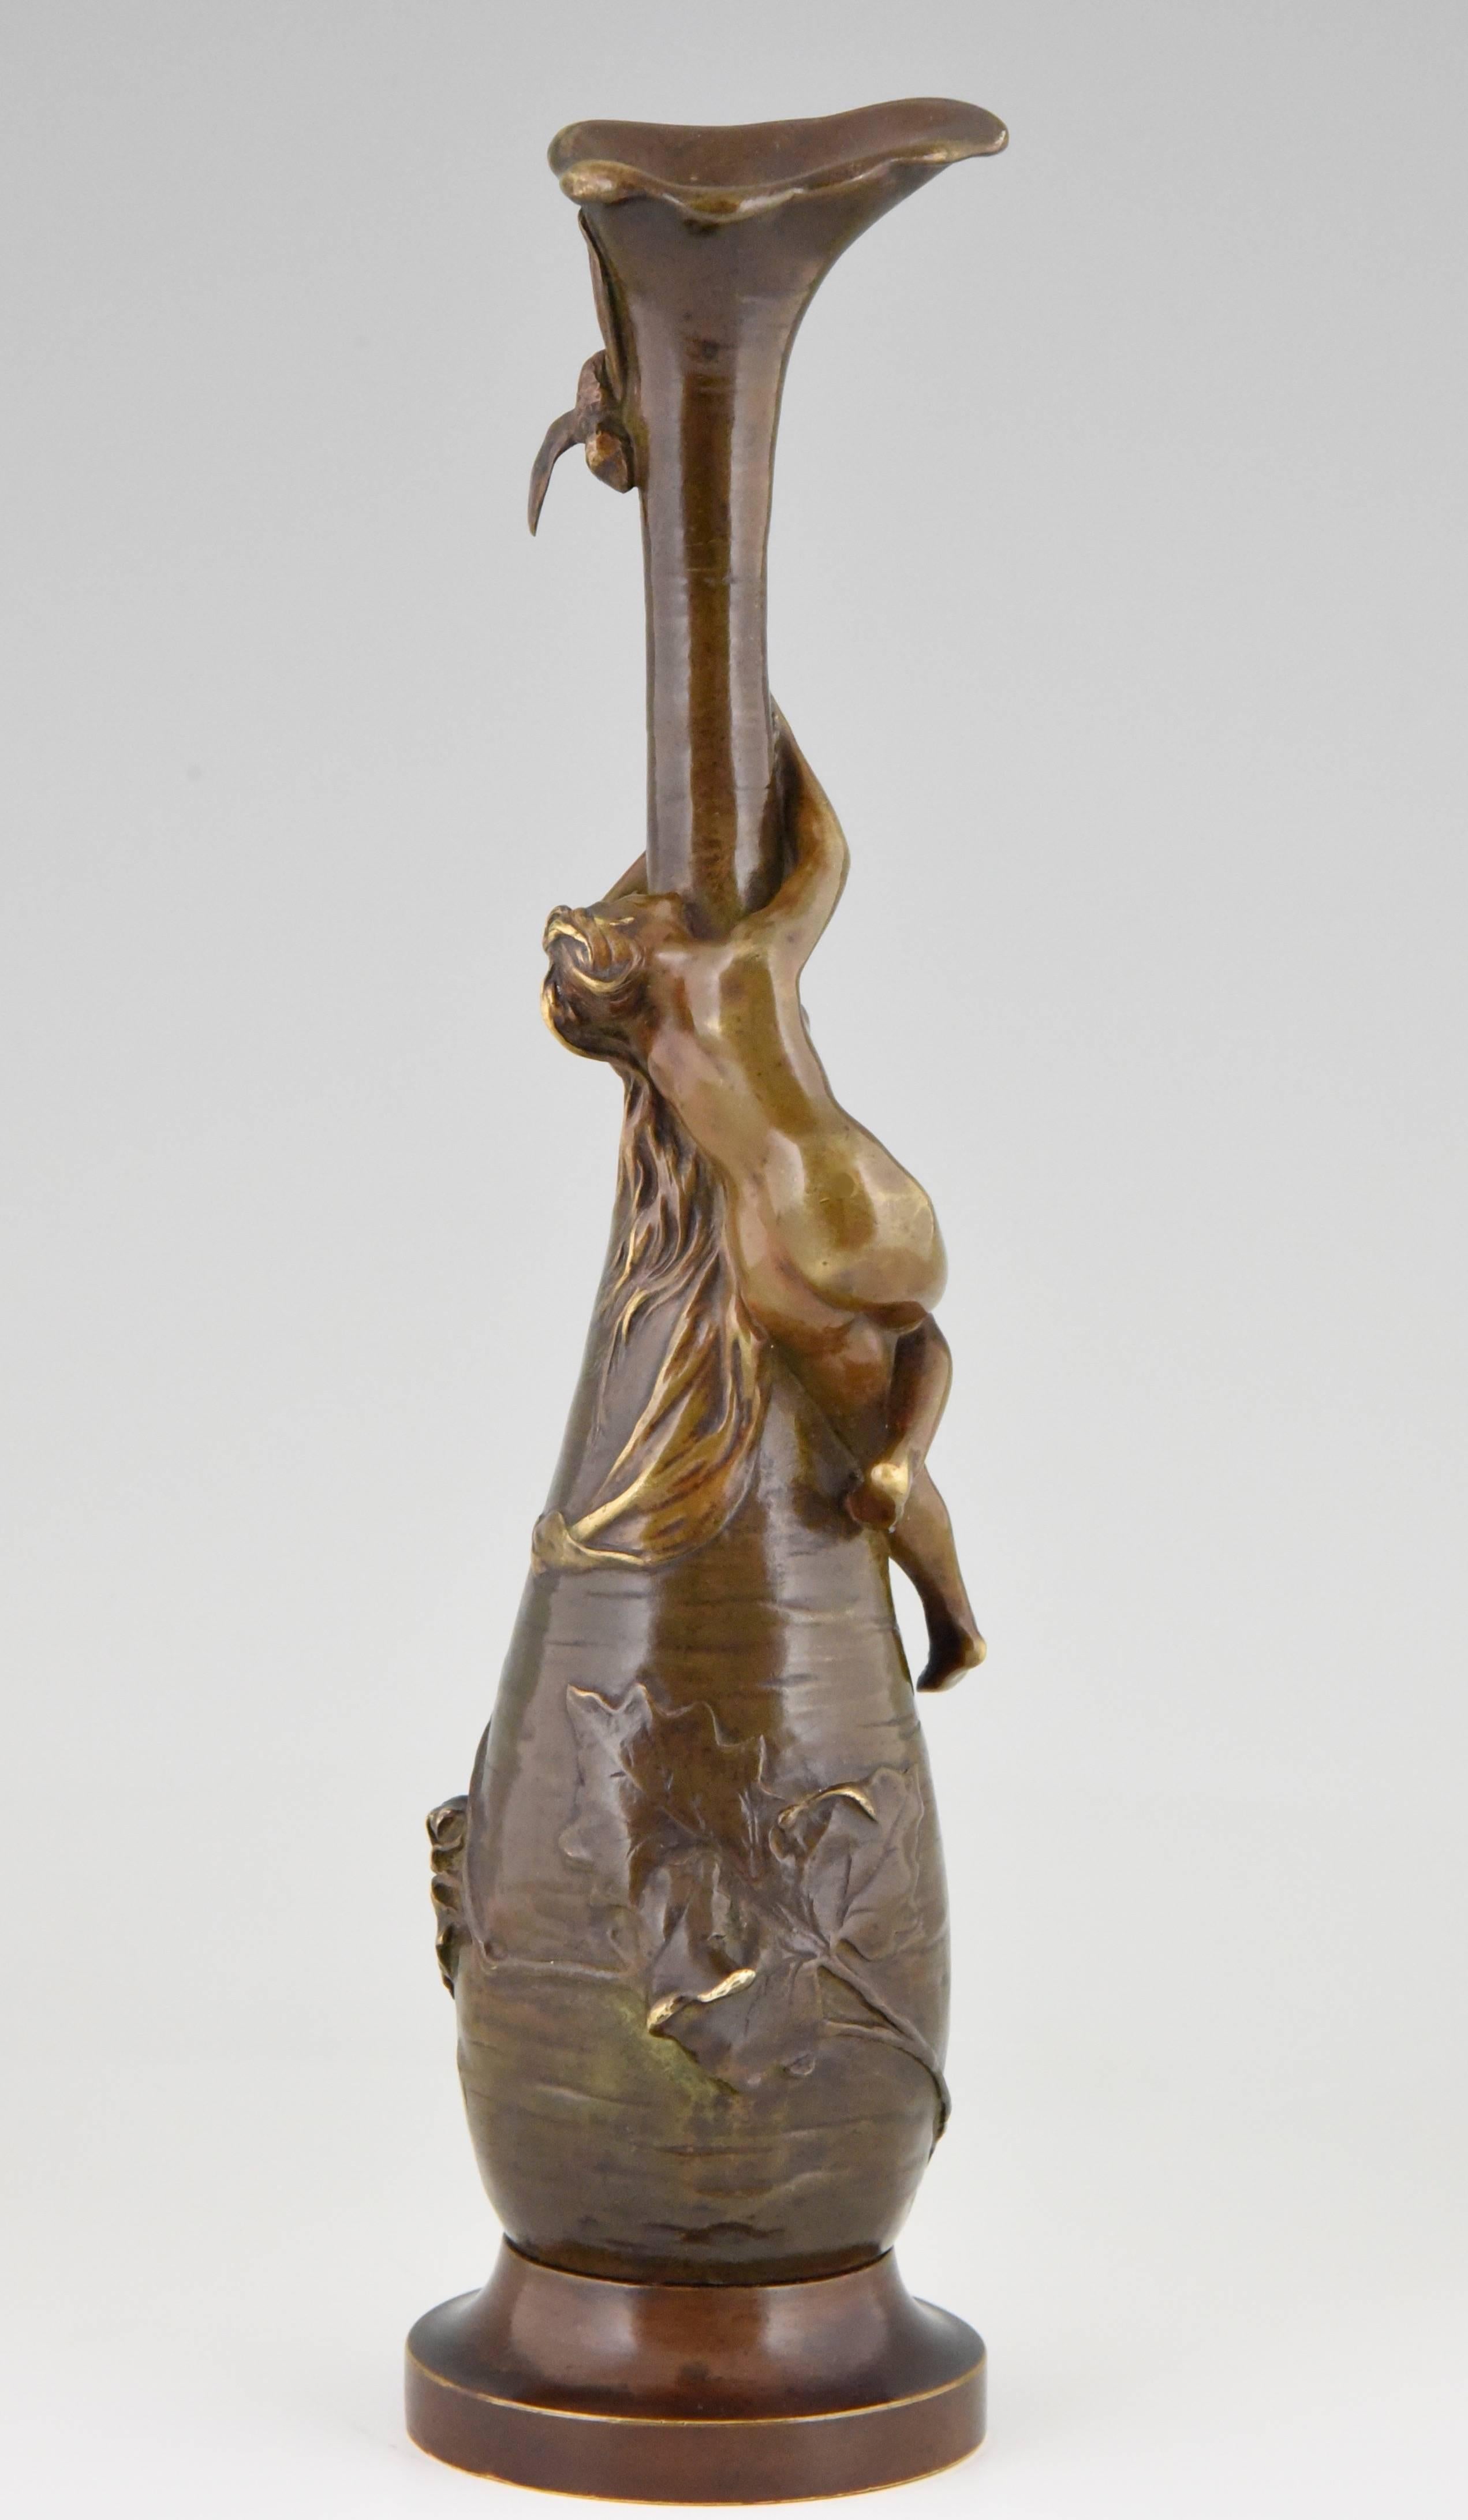 Art Nouveau vase with a nude reaching out for a dragonfly.  The vase is decorated with leaves. 
Artist: Antoine   Bofill (1865-1925)

Literature:
 “Bronzes, sculptors and founders” by H. Berman, Abage. 
 “The dictionary of sculptors in bronze”